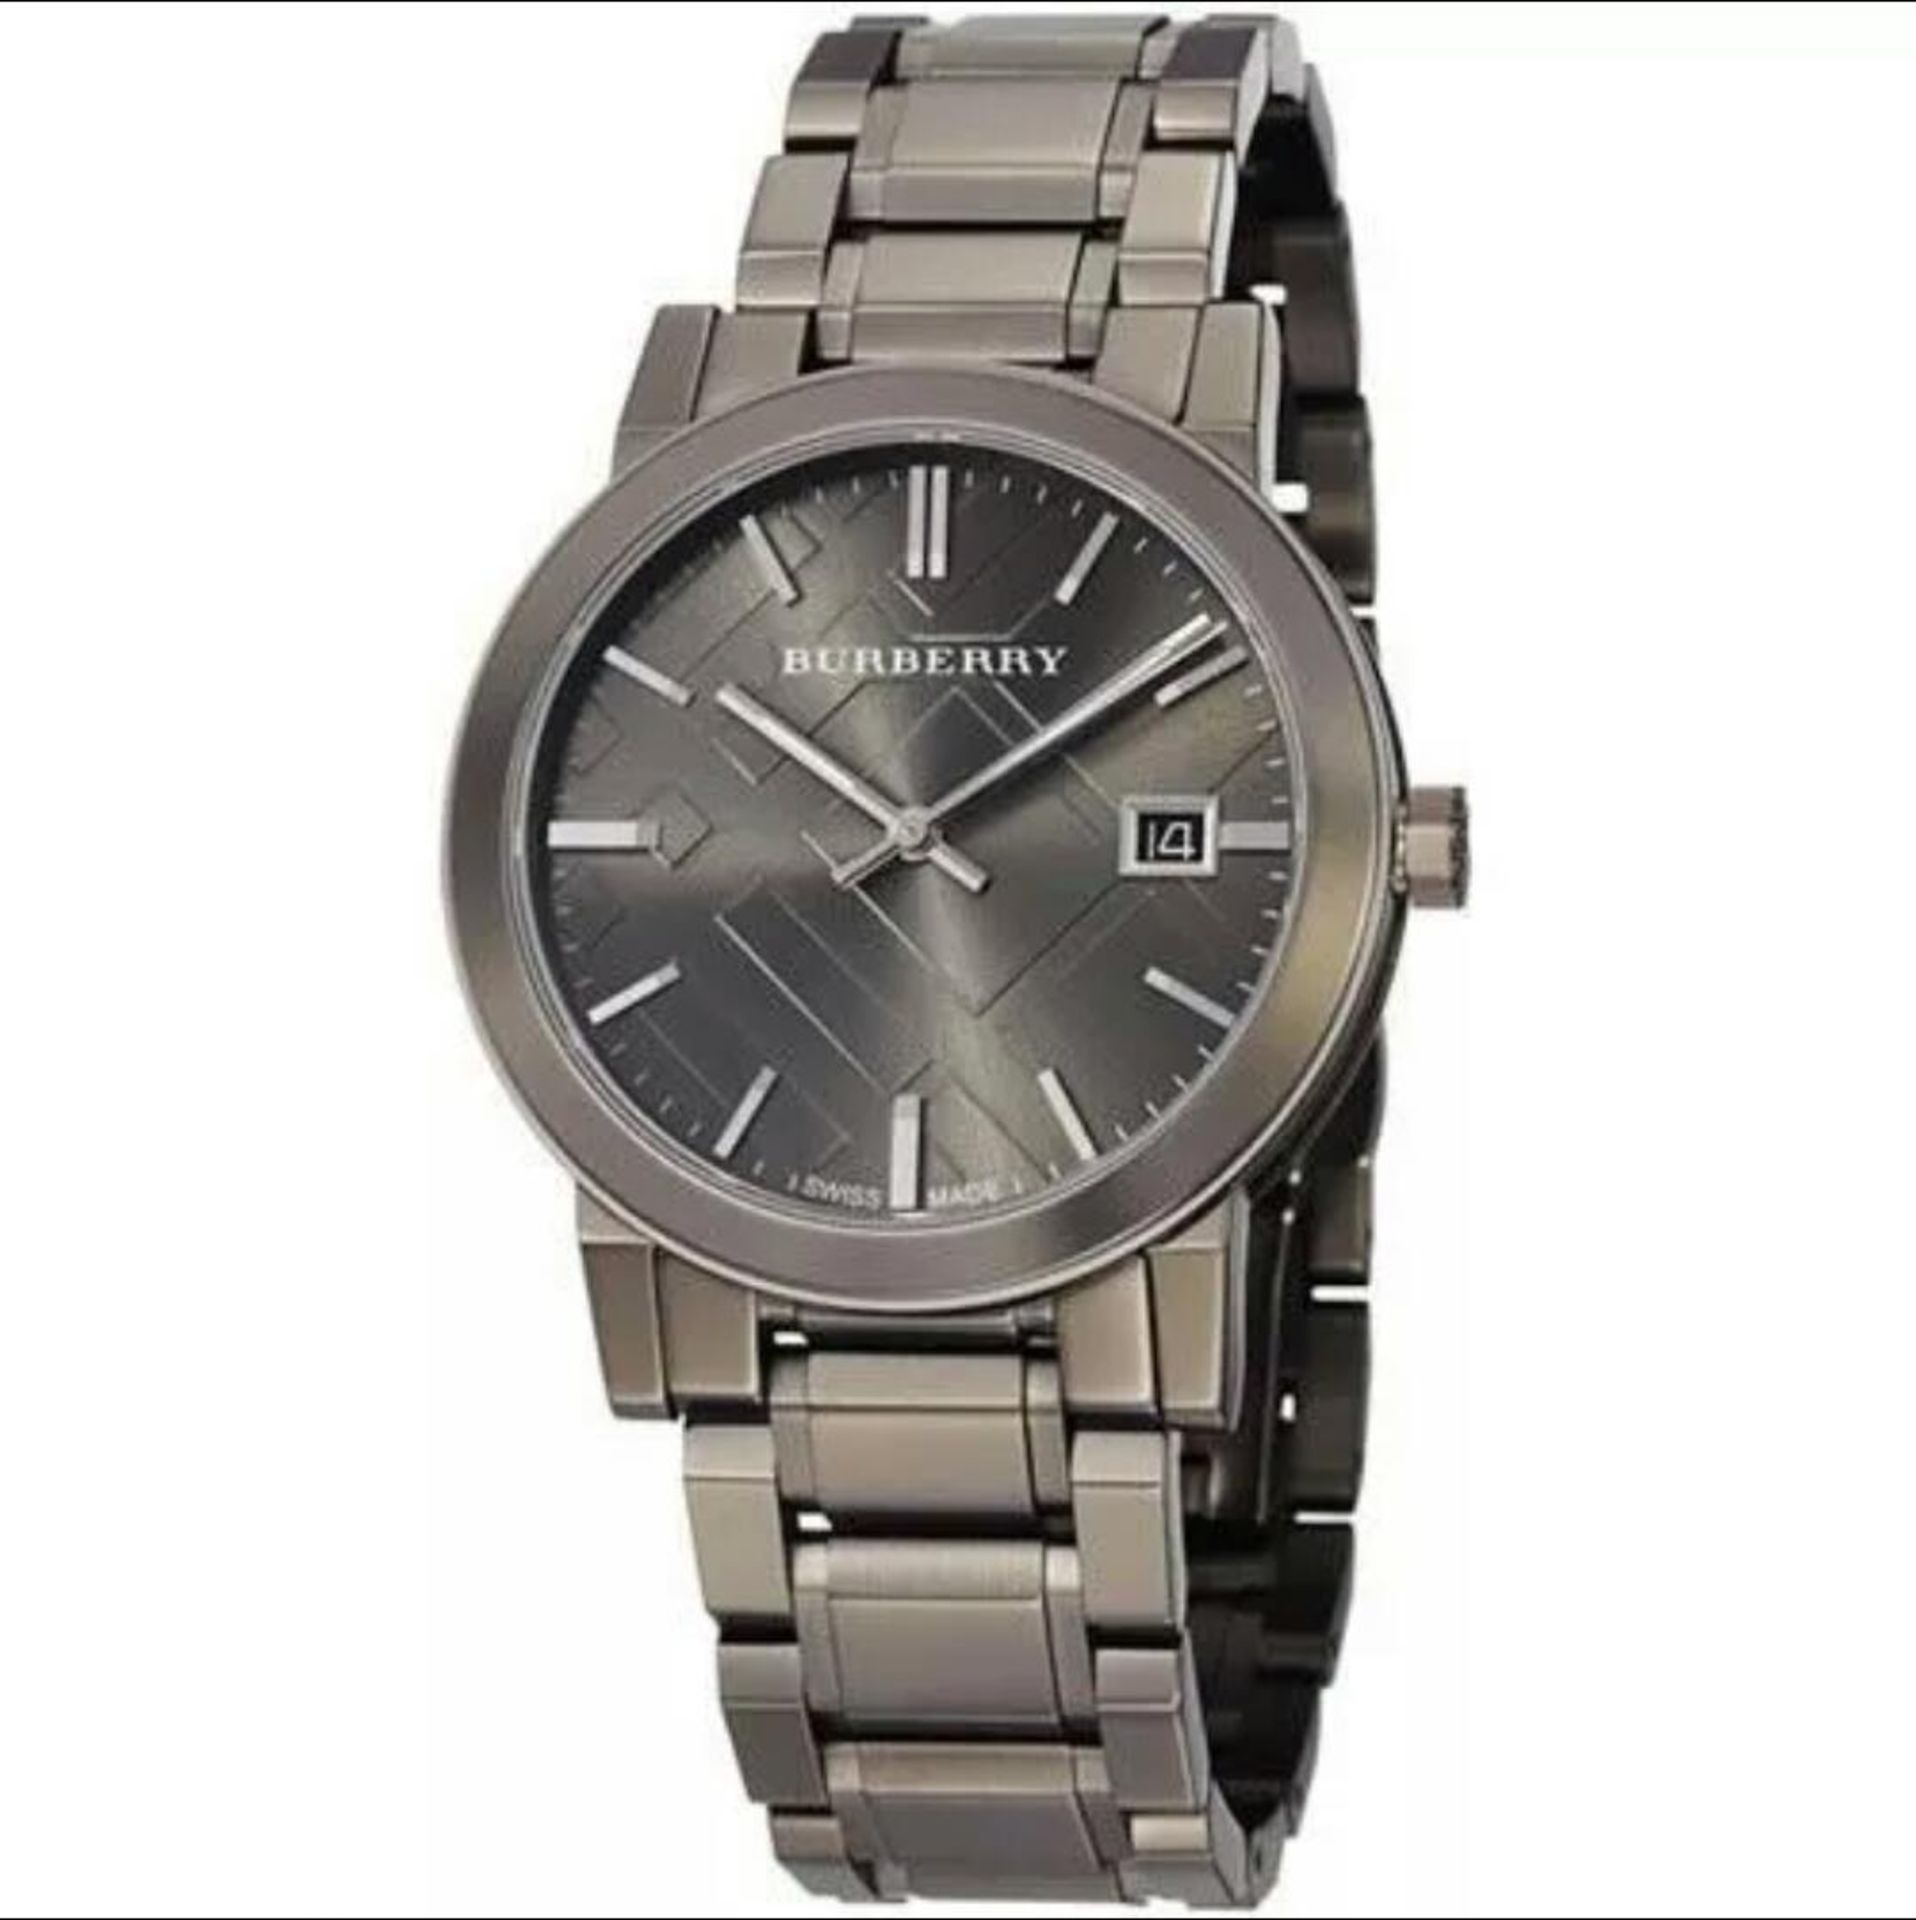 BRAND NEW BURBERRY BU9007,AUTHENTIC GUNMETAL STAINLESS STEEL GENTS WATCH - RRP £399, FREE P&P